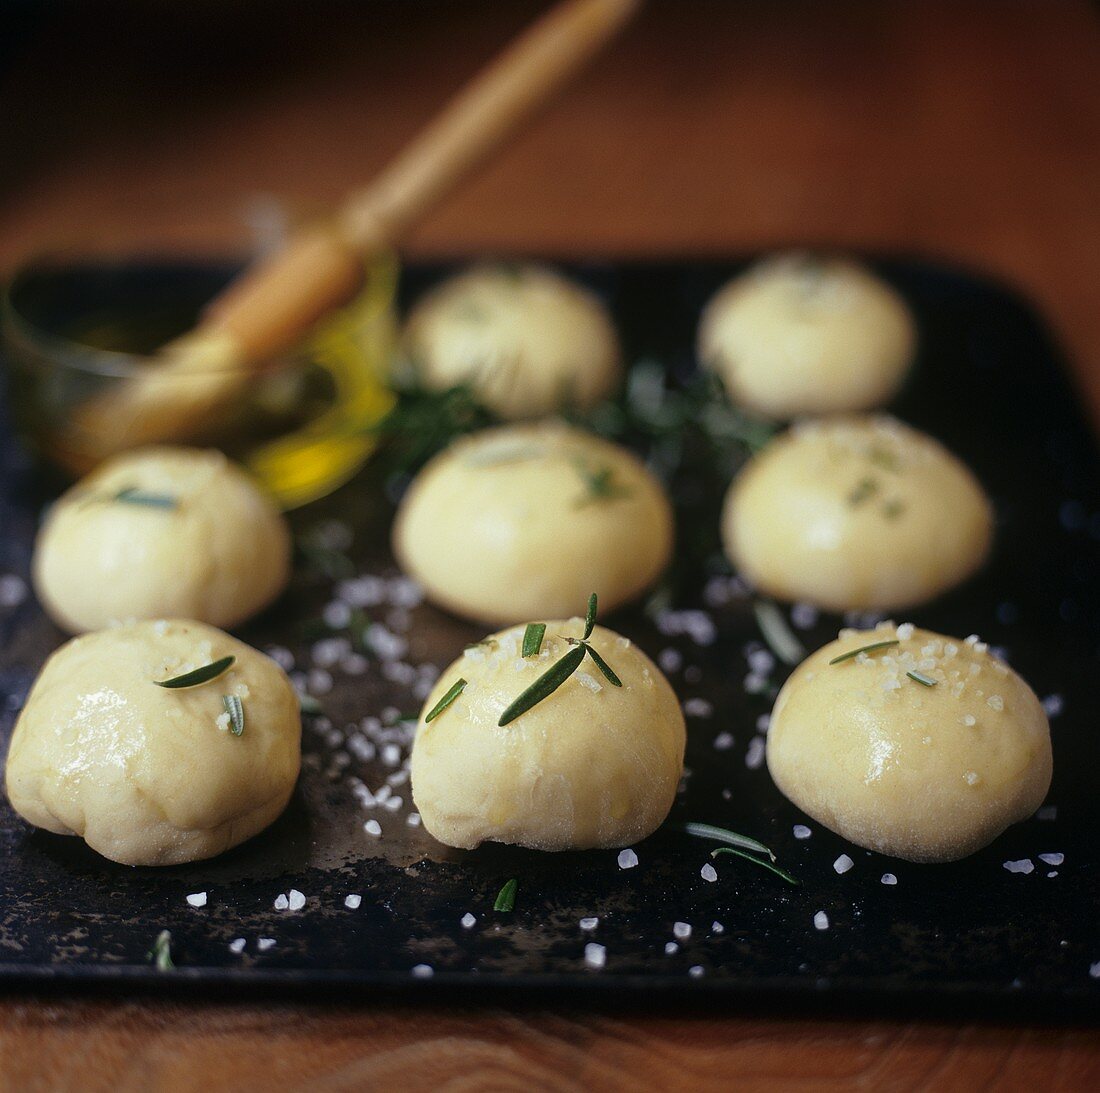 Balls of dough sprinkled with rosemary & salt on baking tray